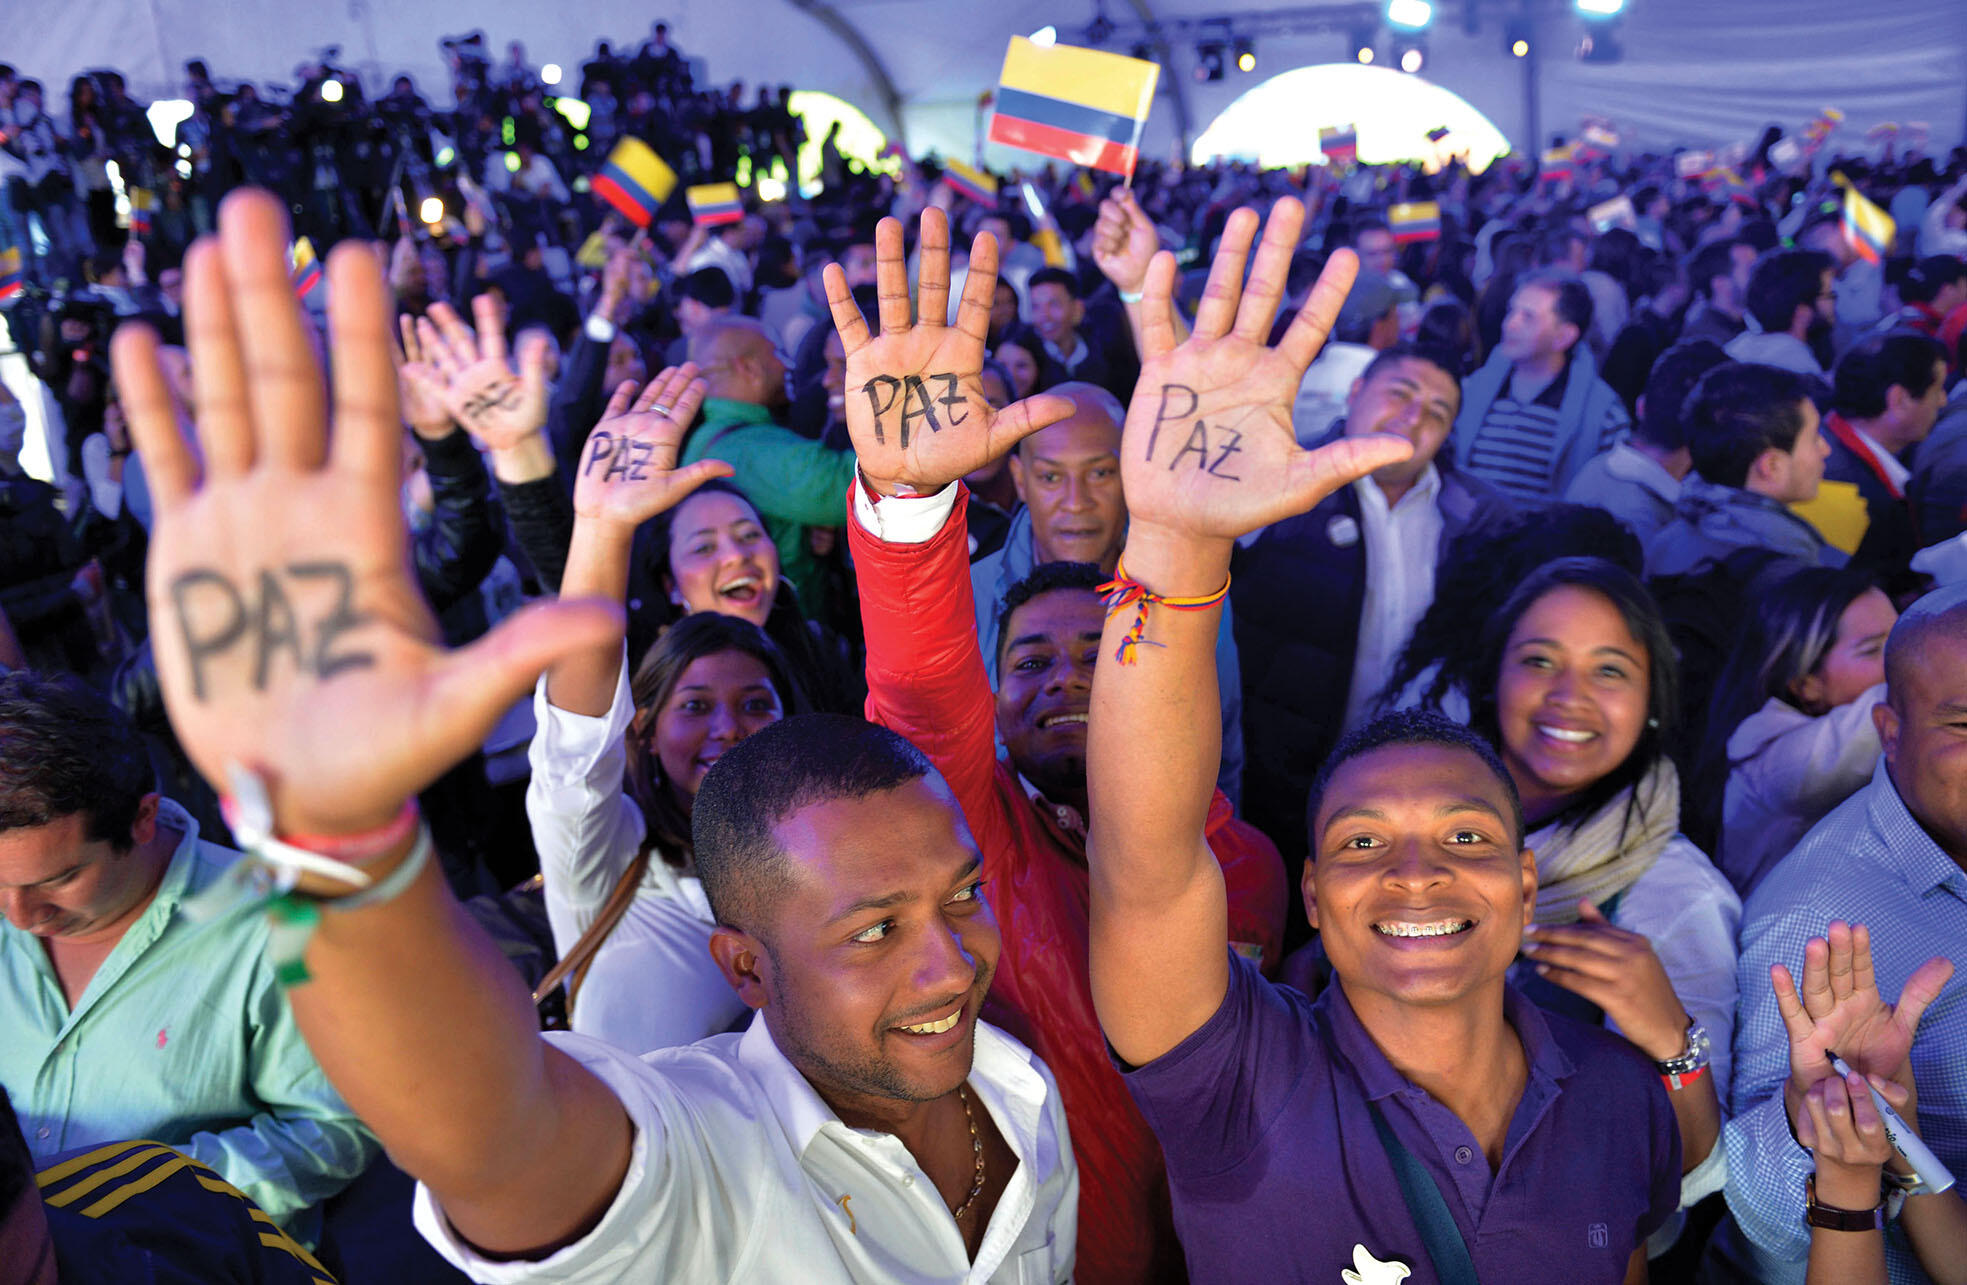 Supporters of President Santos with “peace” written on their hands celebrate his victory in the runoff election. (Photo by Santiago Cortez/Associated Press.)